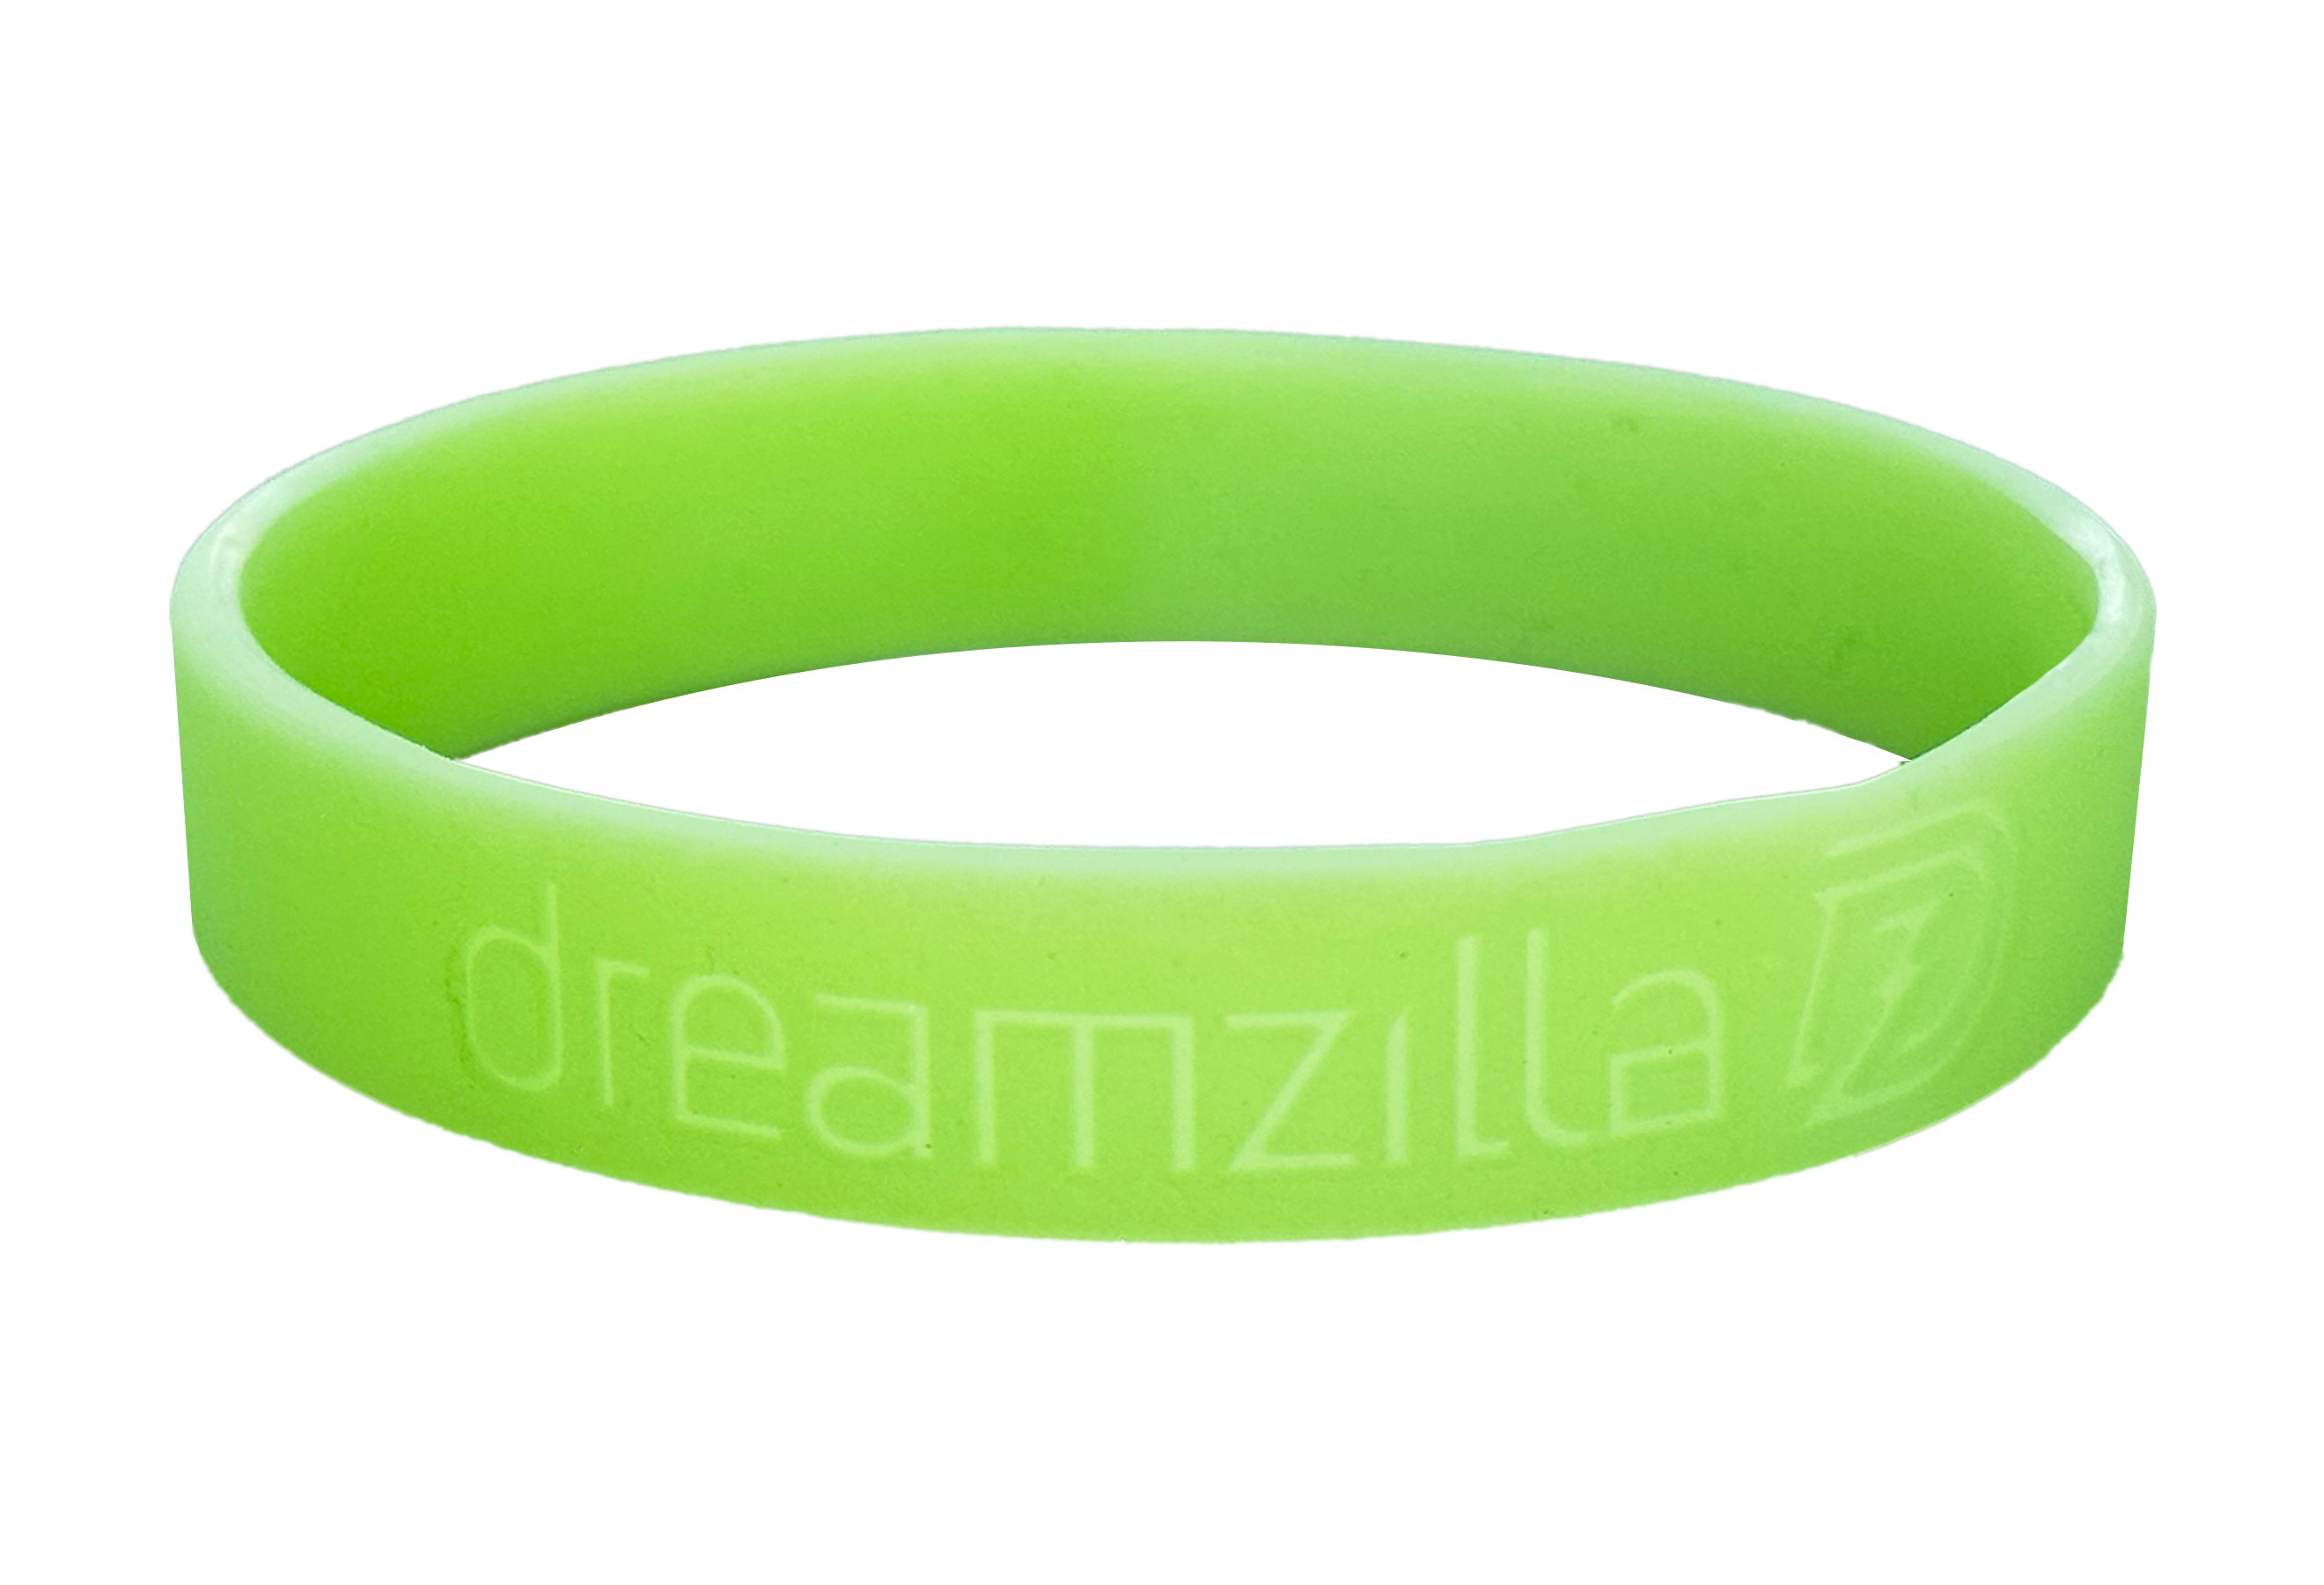 Glow-in-the-dark Wristband with Donation